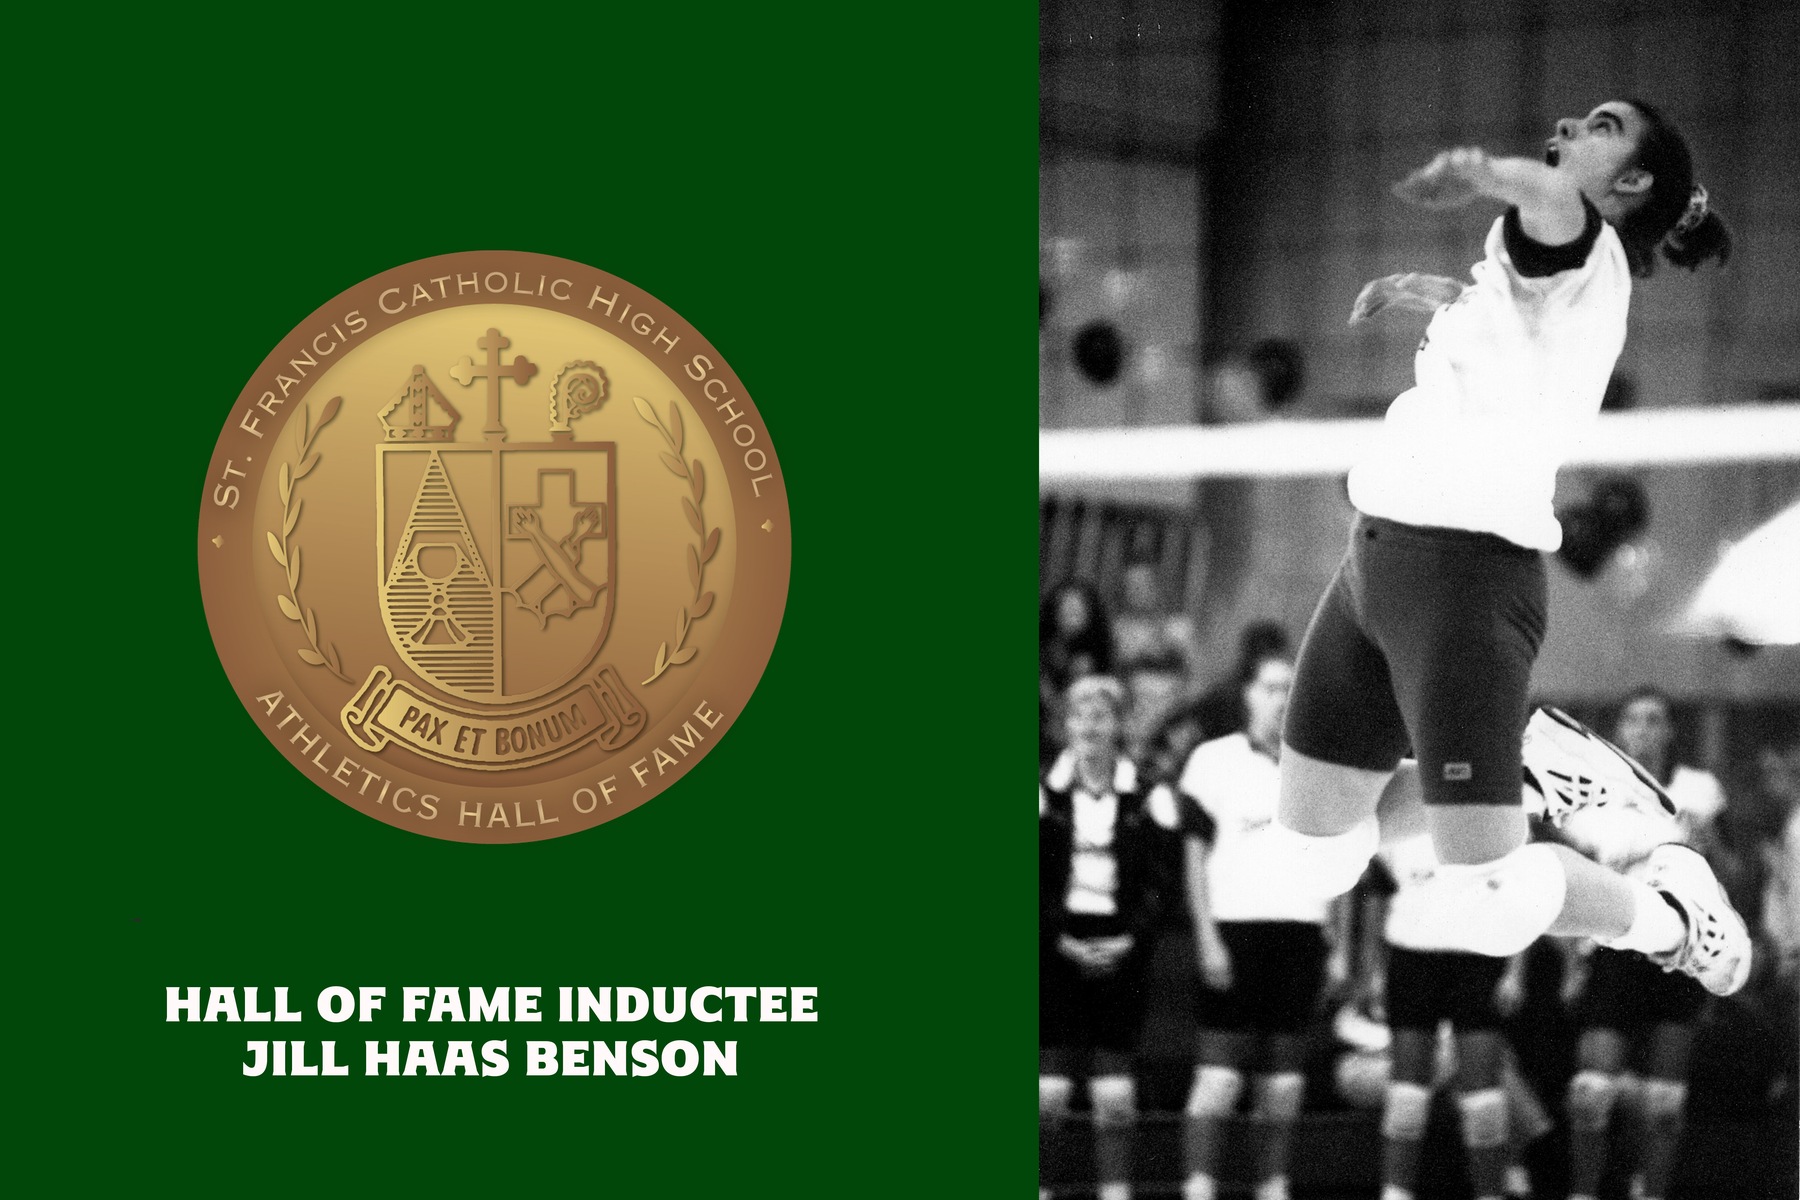 Two-Sport Star Jill Haas Benson to be inducted in Athletics Hall of Fame Saturday